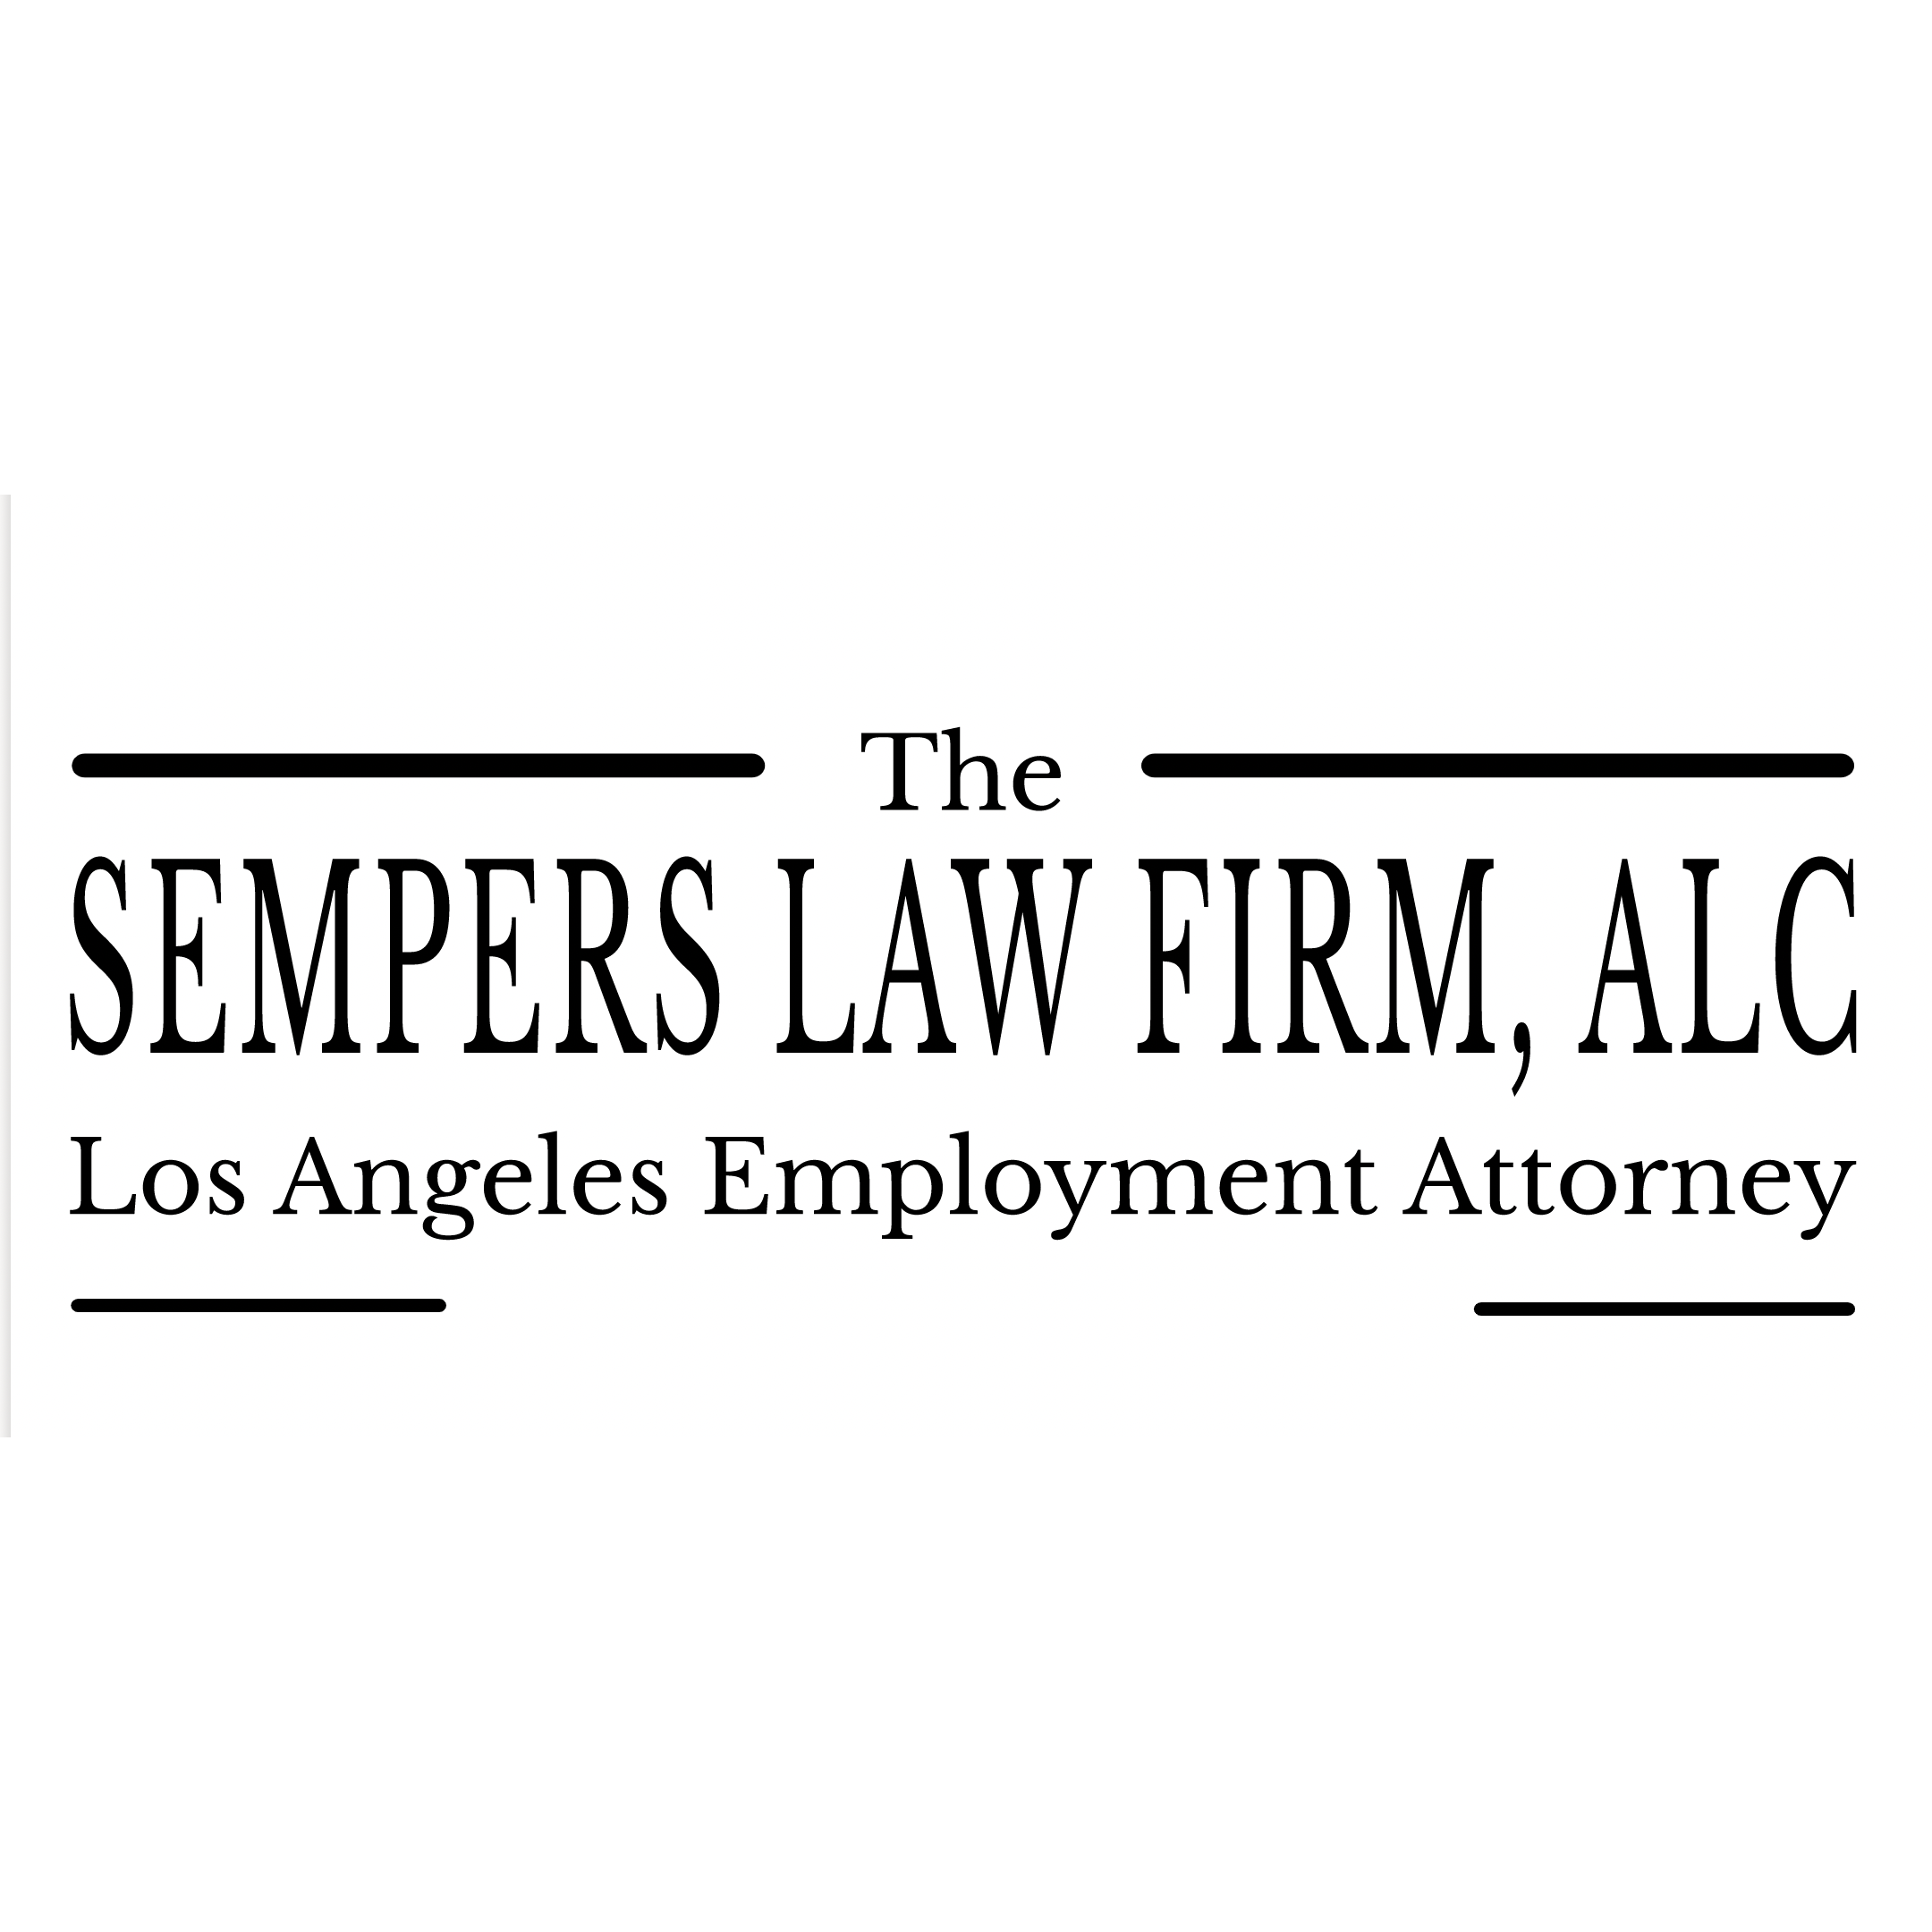 The Sempers Law Firm Los Angeles Employment Attorney Logo